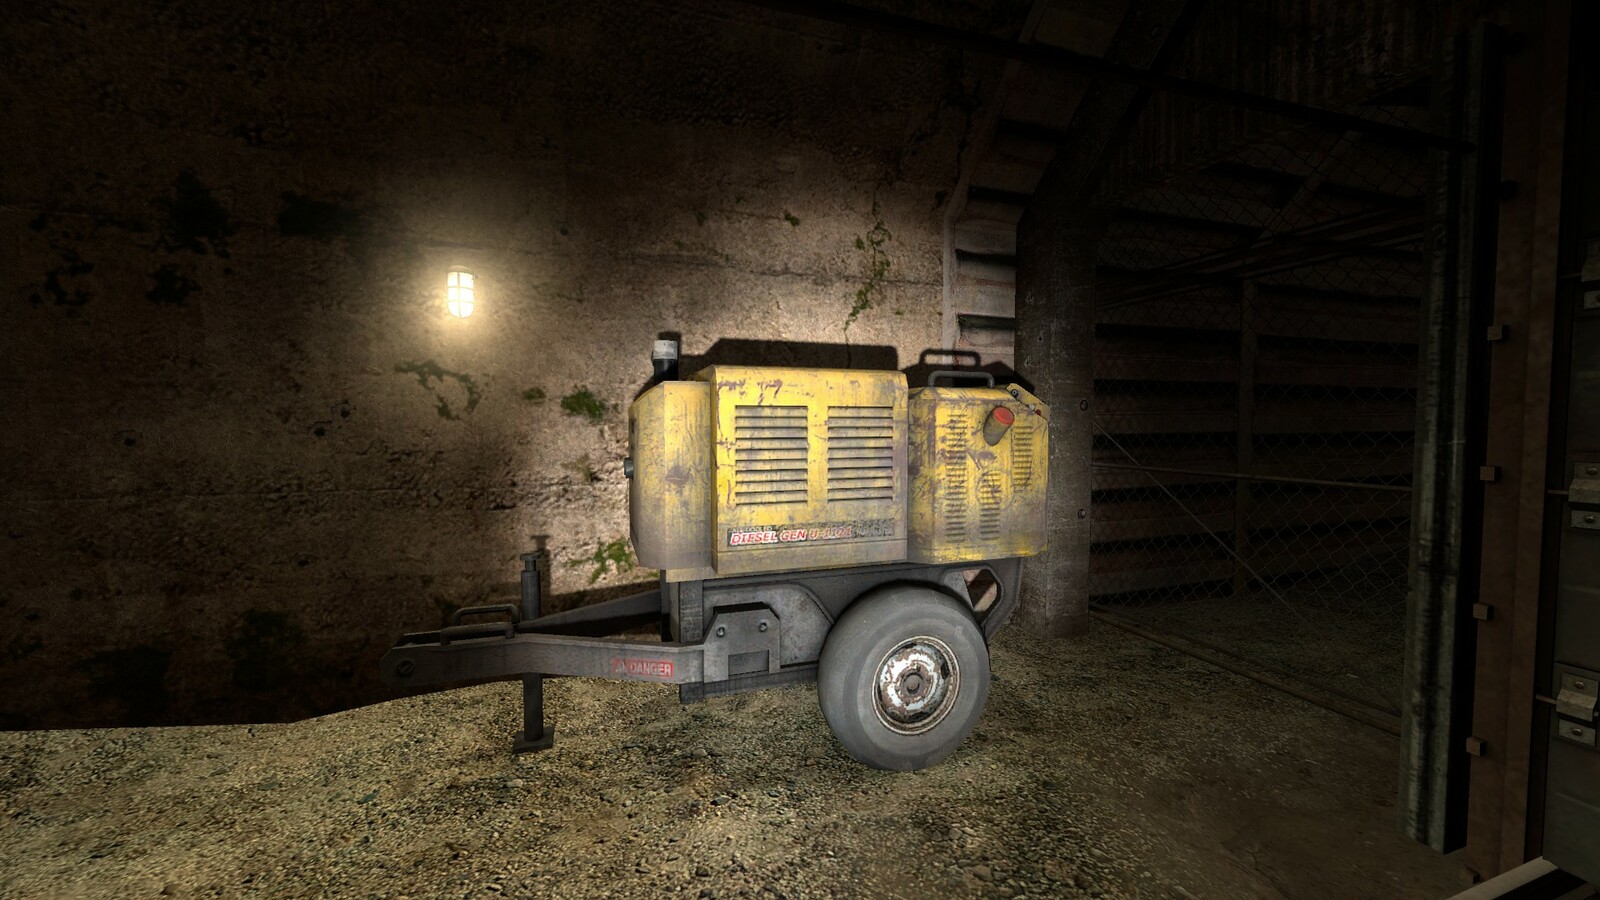 Generator from Half-Life 2 Episode 2 which inspired me